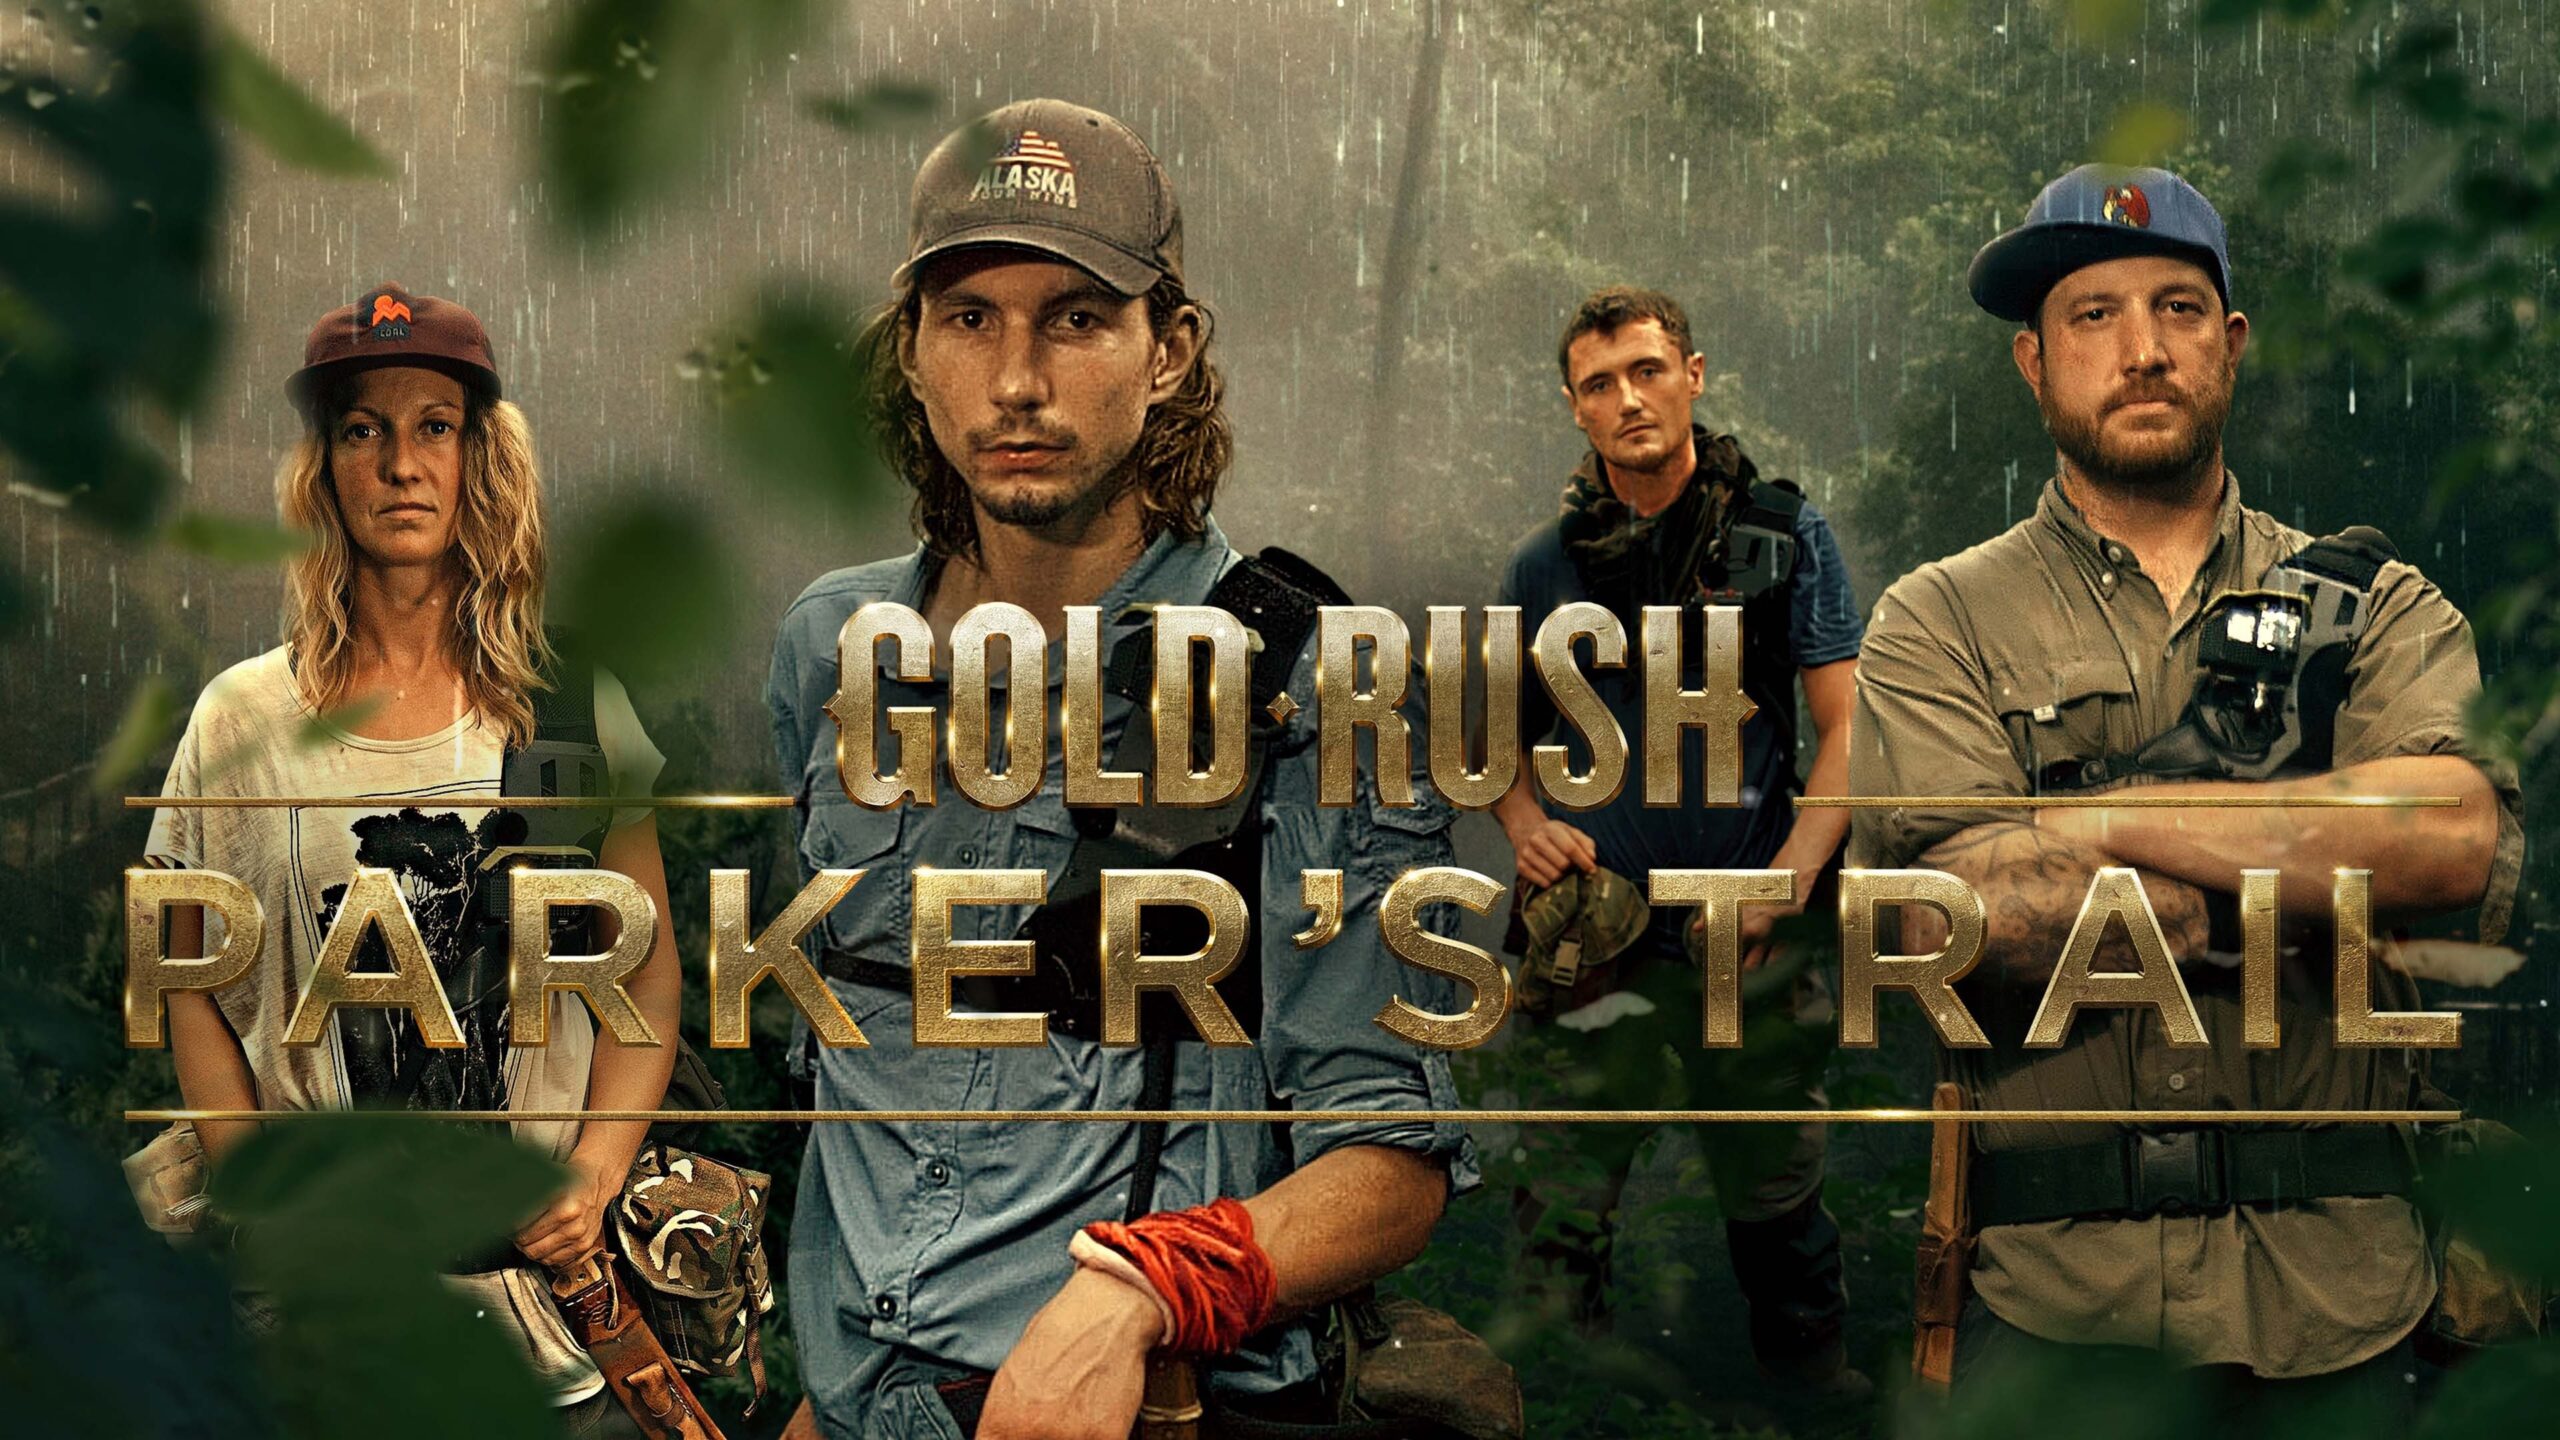 All-New Season of "Gold Rush: Parker's Trail" coming soon